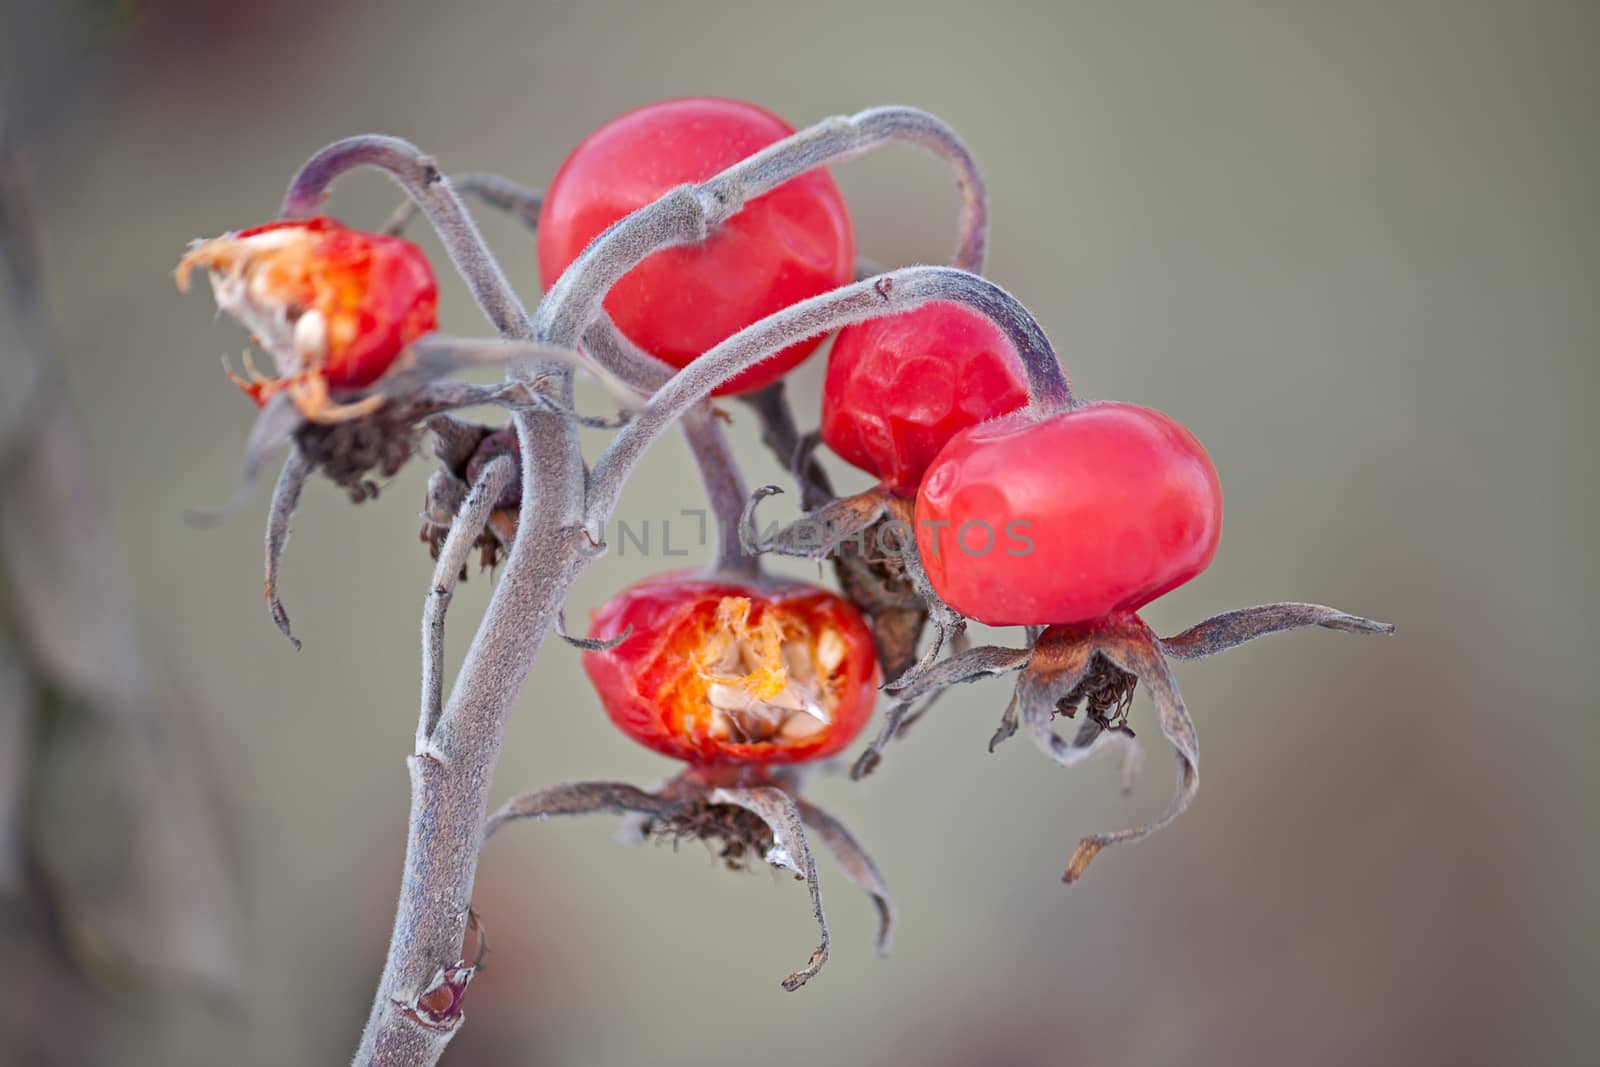 Rosehip berries on light background. Image with shallow depth of field.